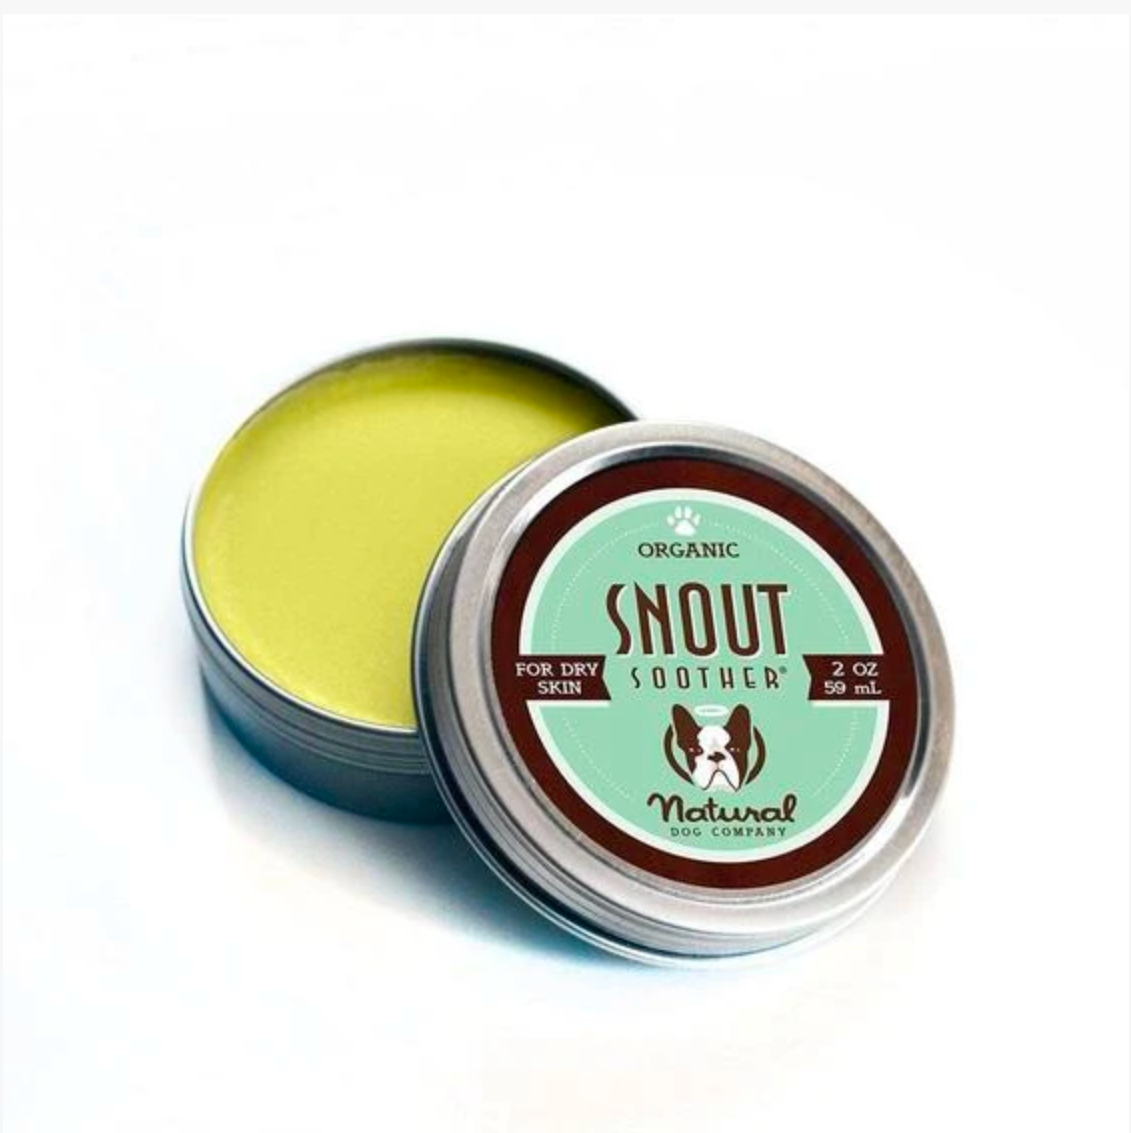 Snout Soother Tin